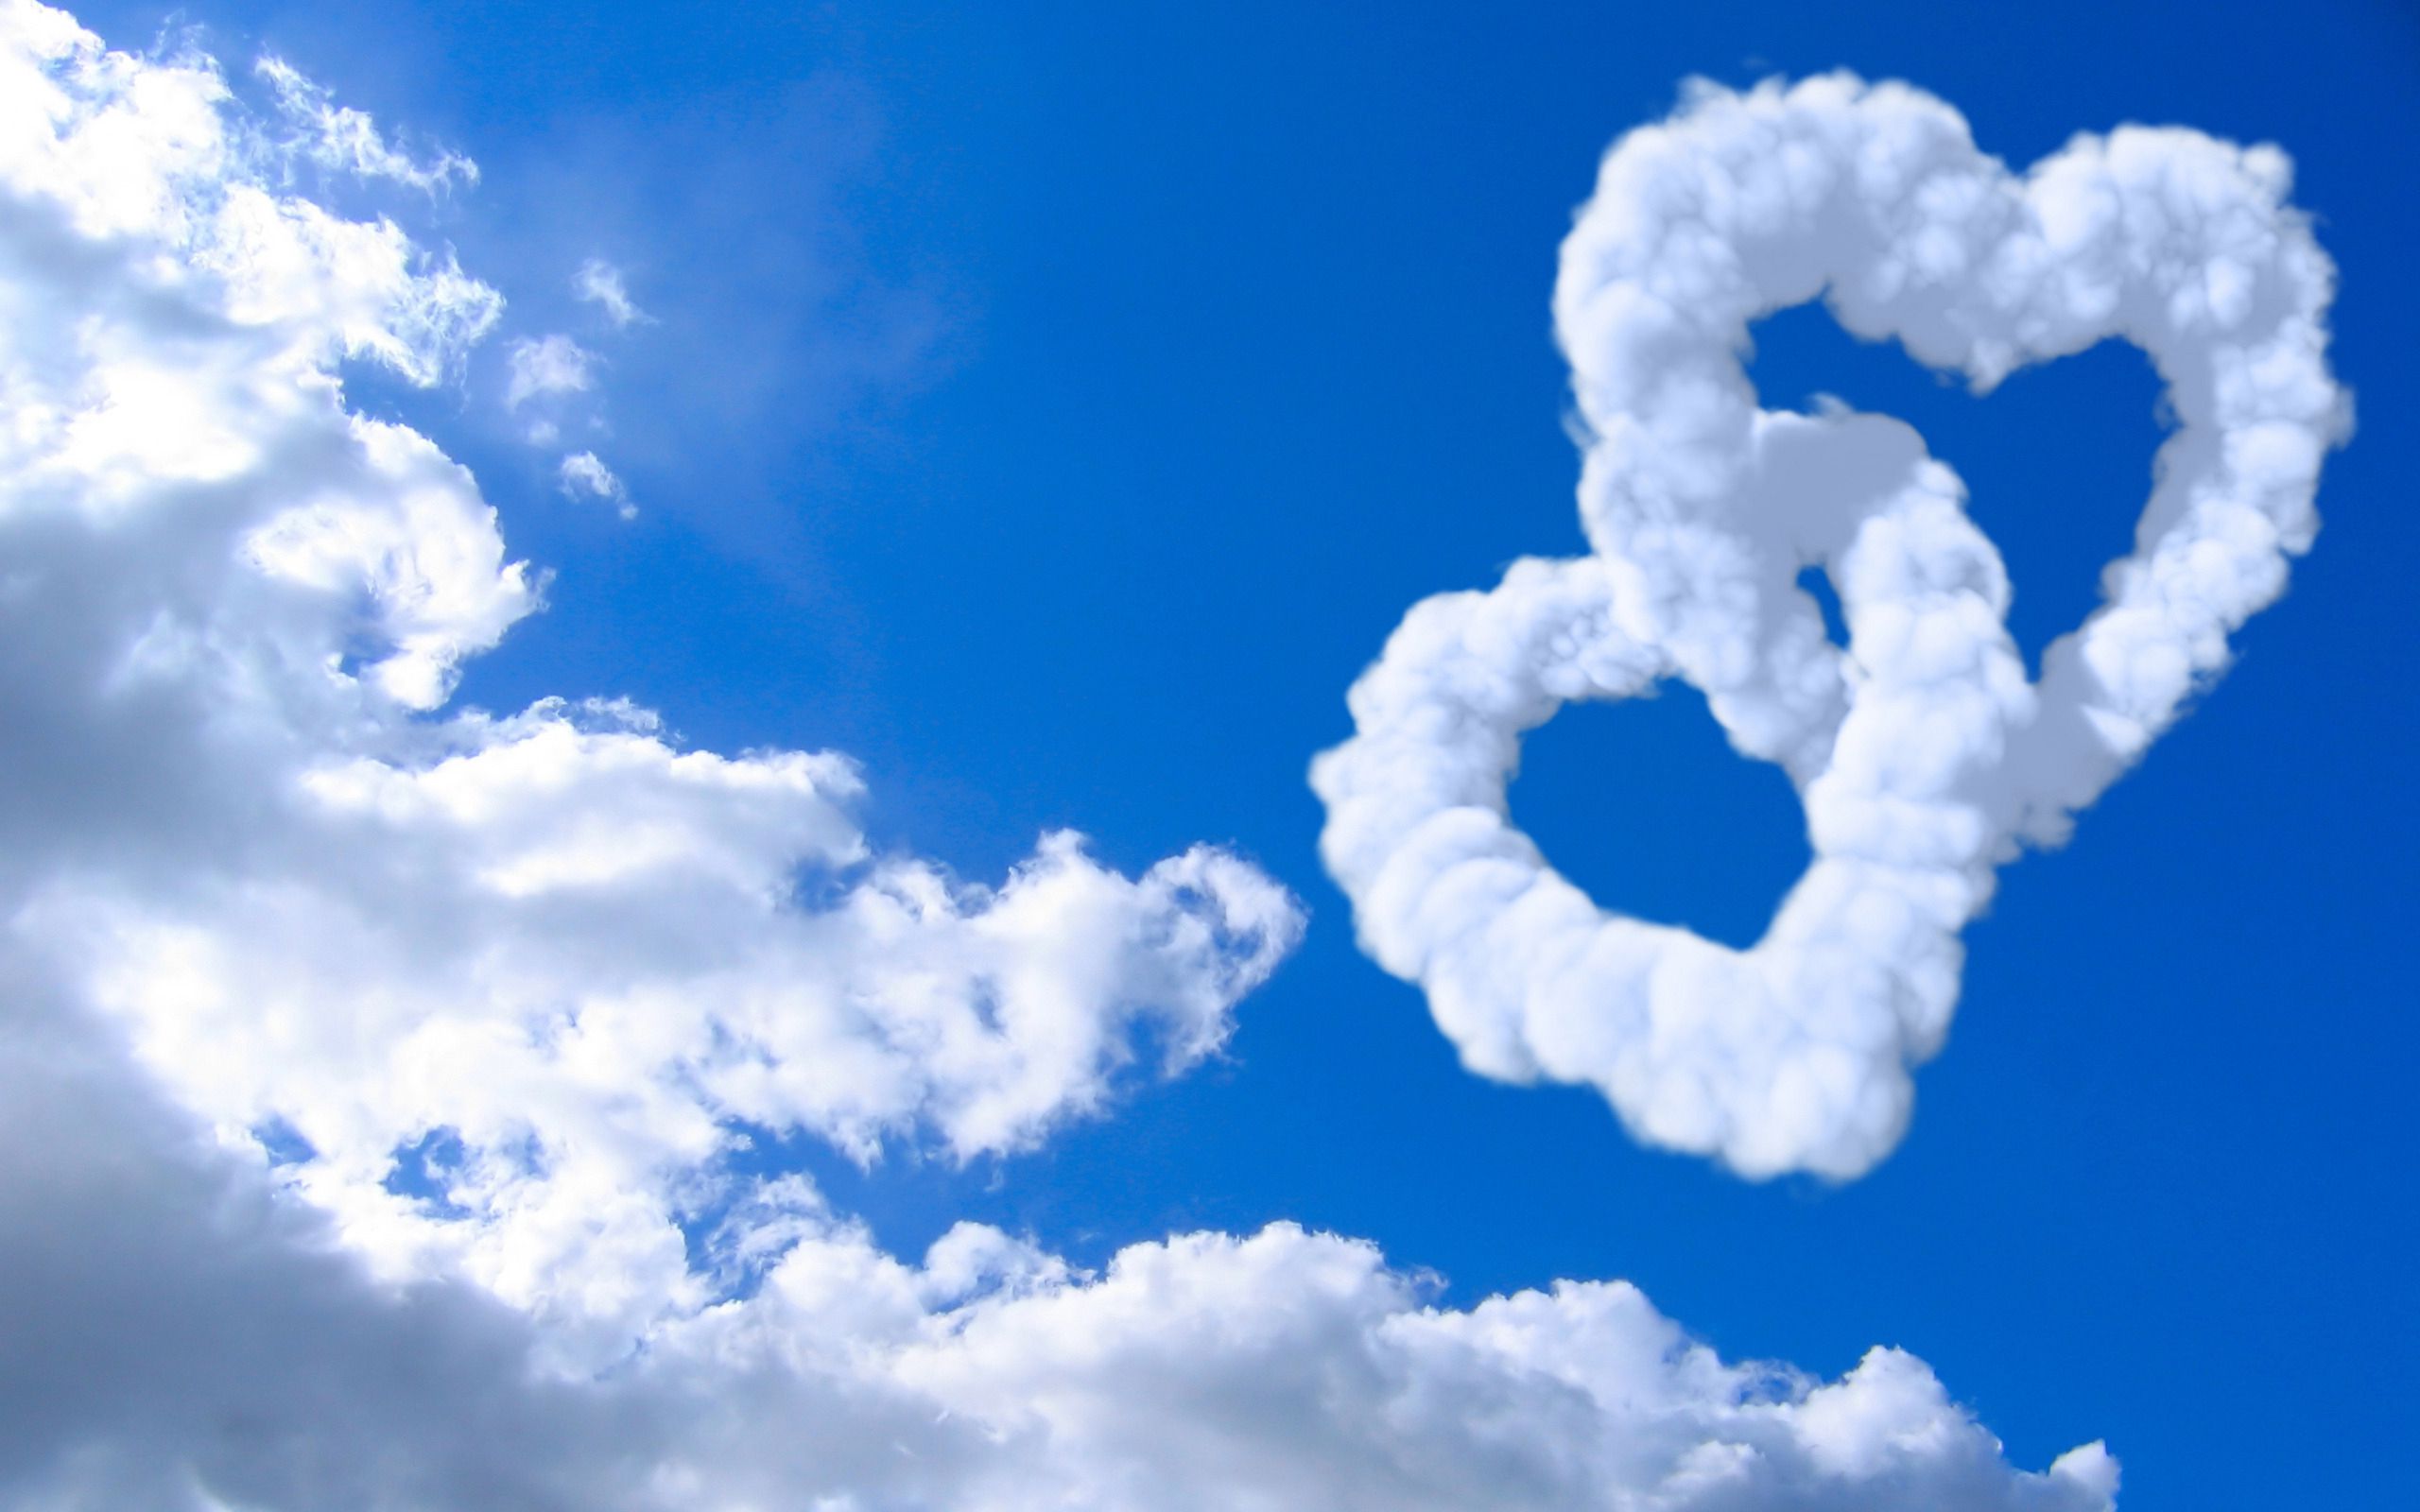 Hearts With Clouds and Blue Sky Presentation